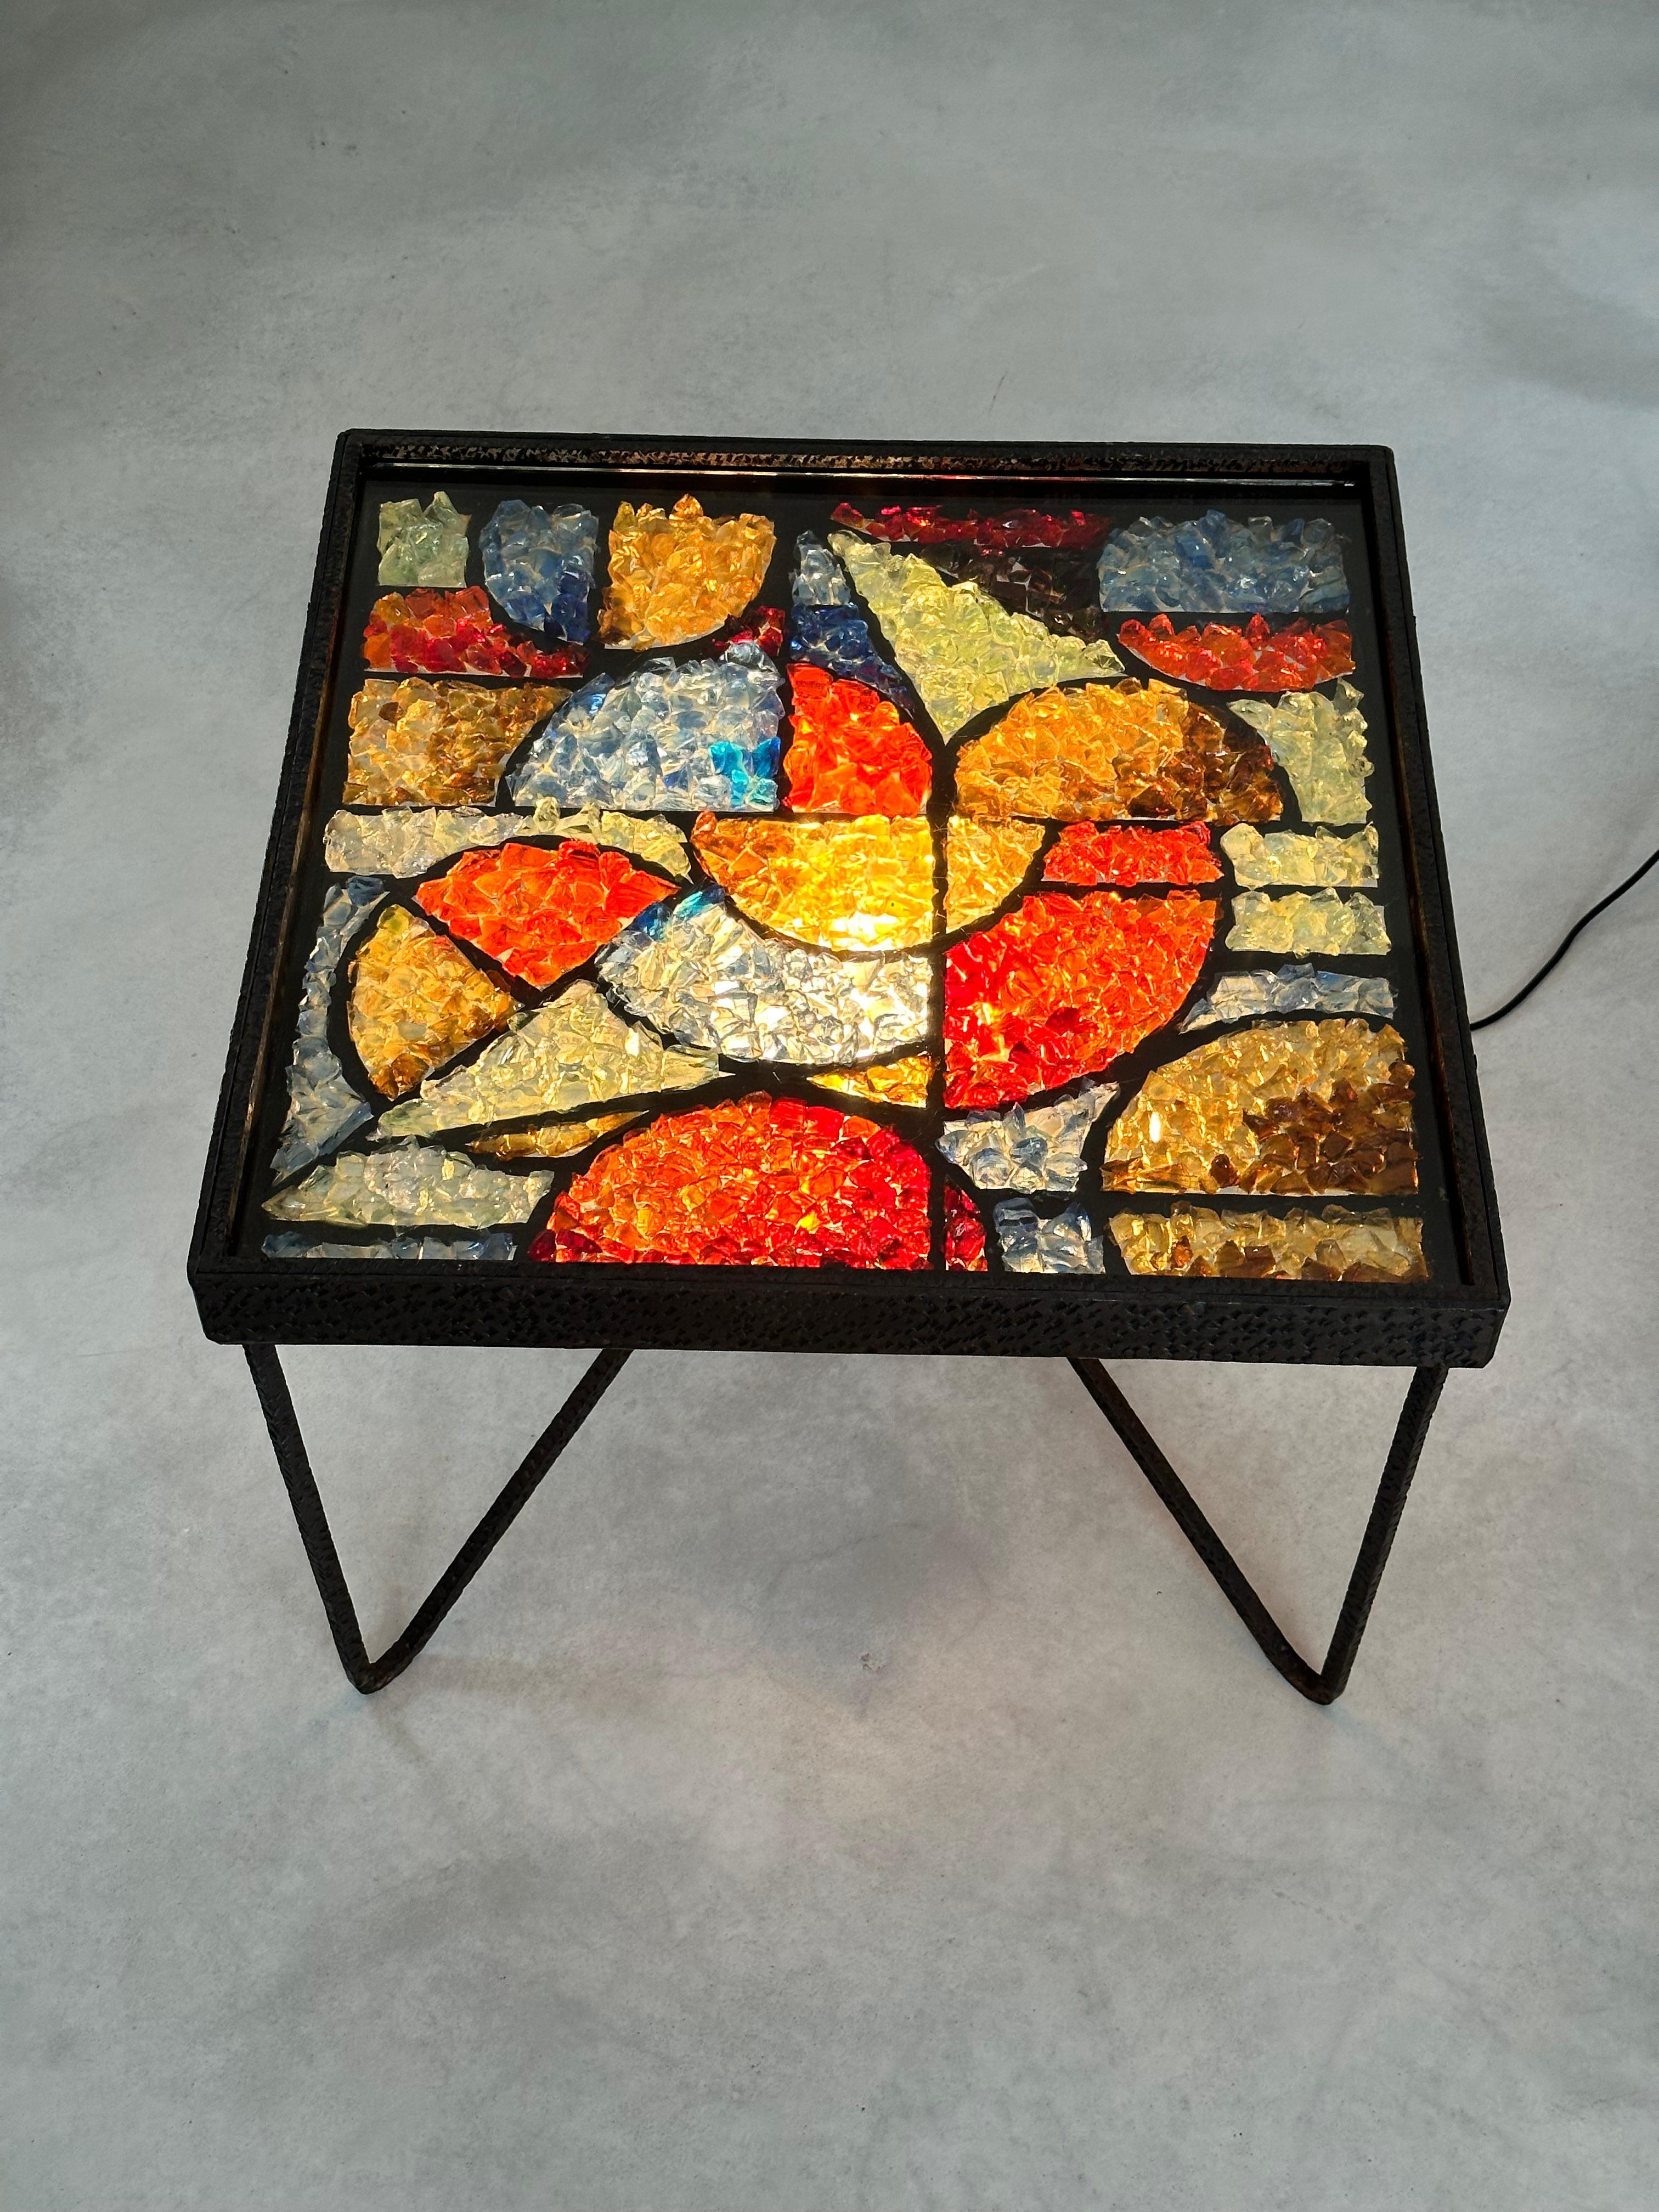 Exceptional light coffee table by the architect André Kulesza, hammered wrought iron and polychrome stained glass crystals. 

The fragments of glass crystals have been carefully selected and combined harmoniously to represent an abstract design.
The